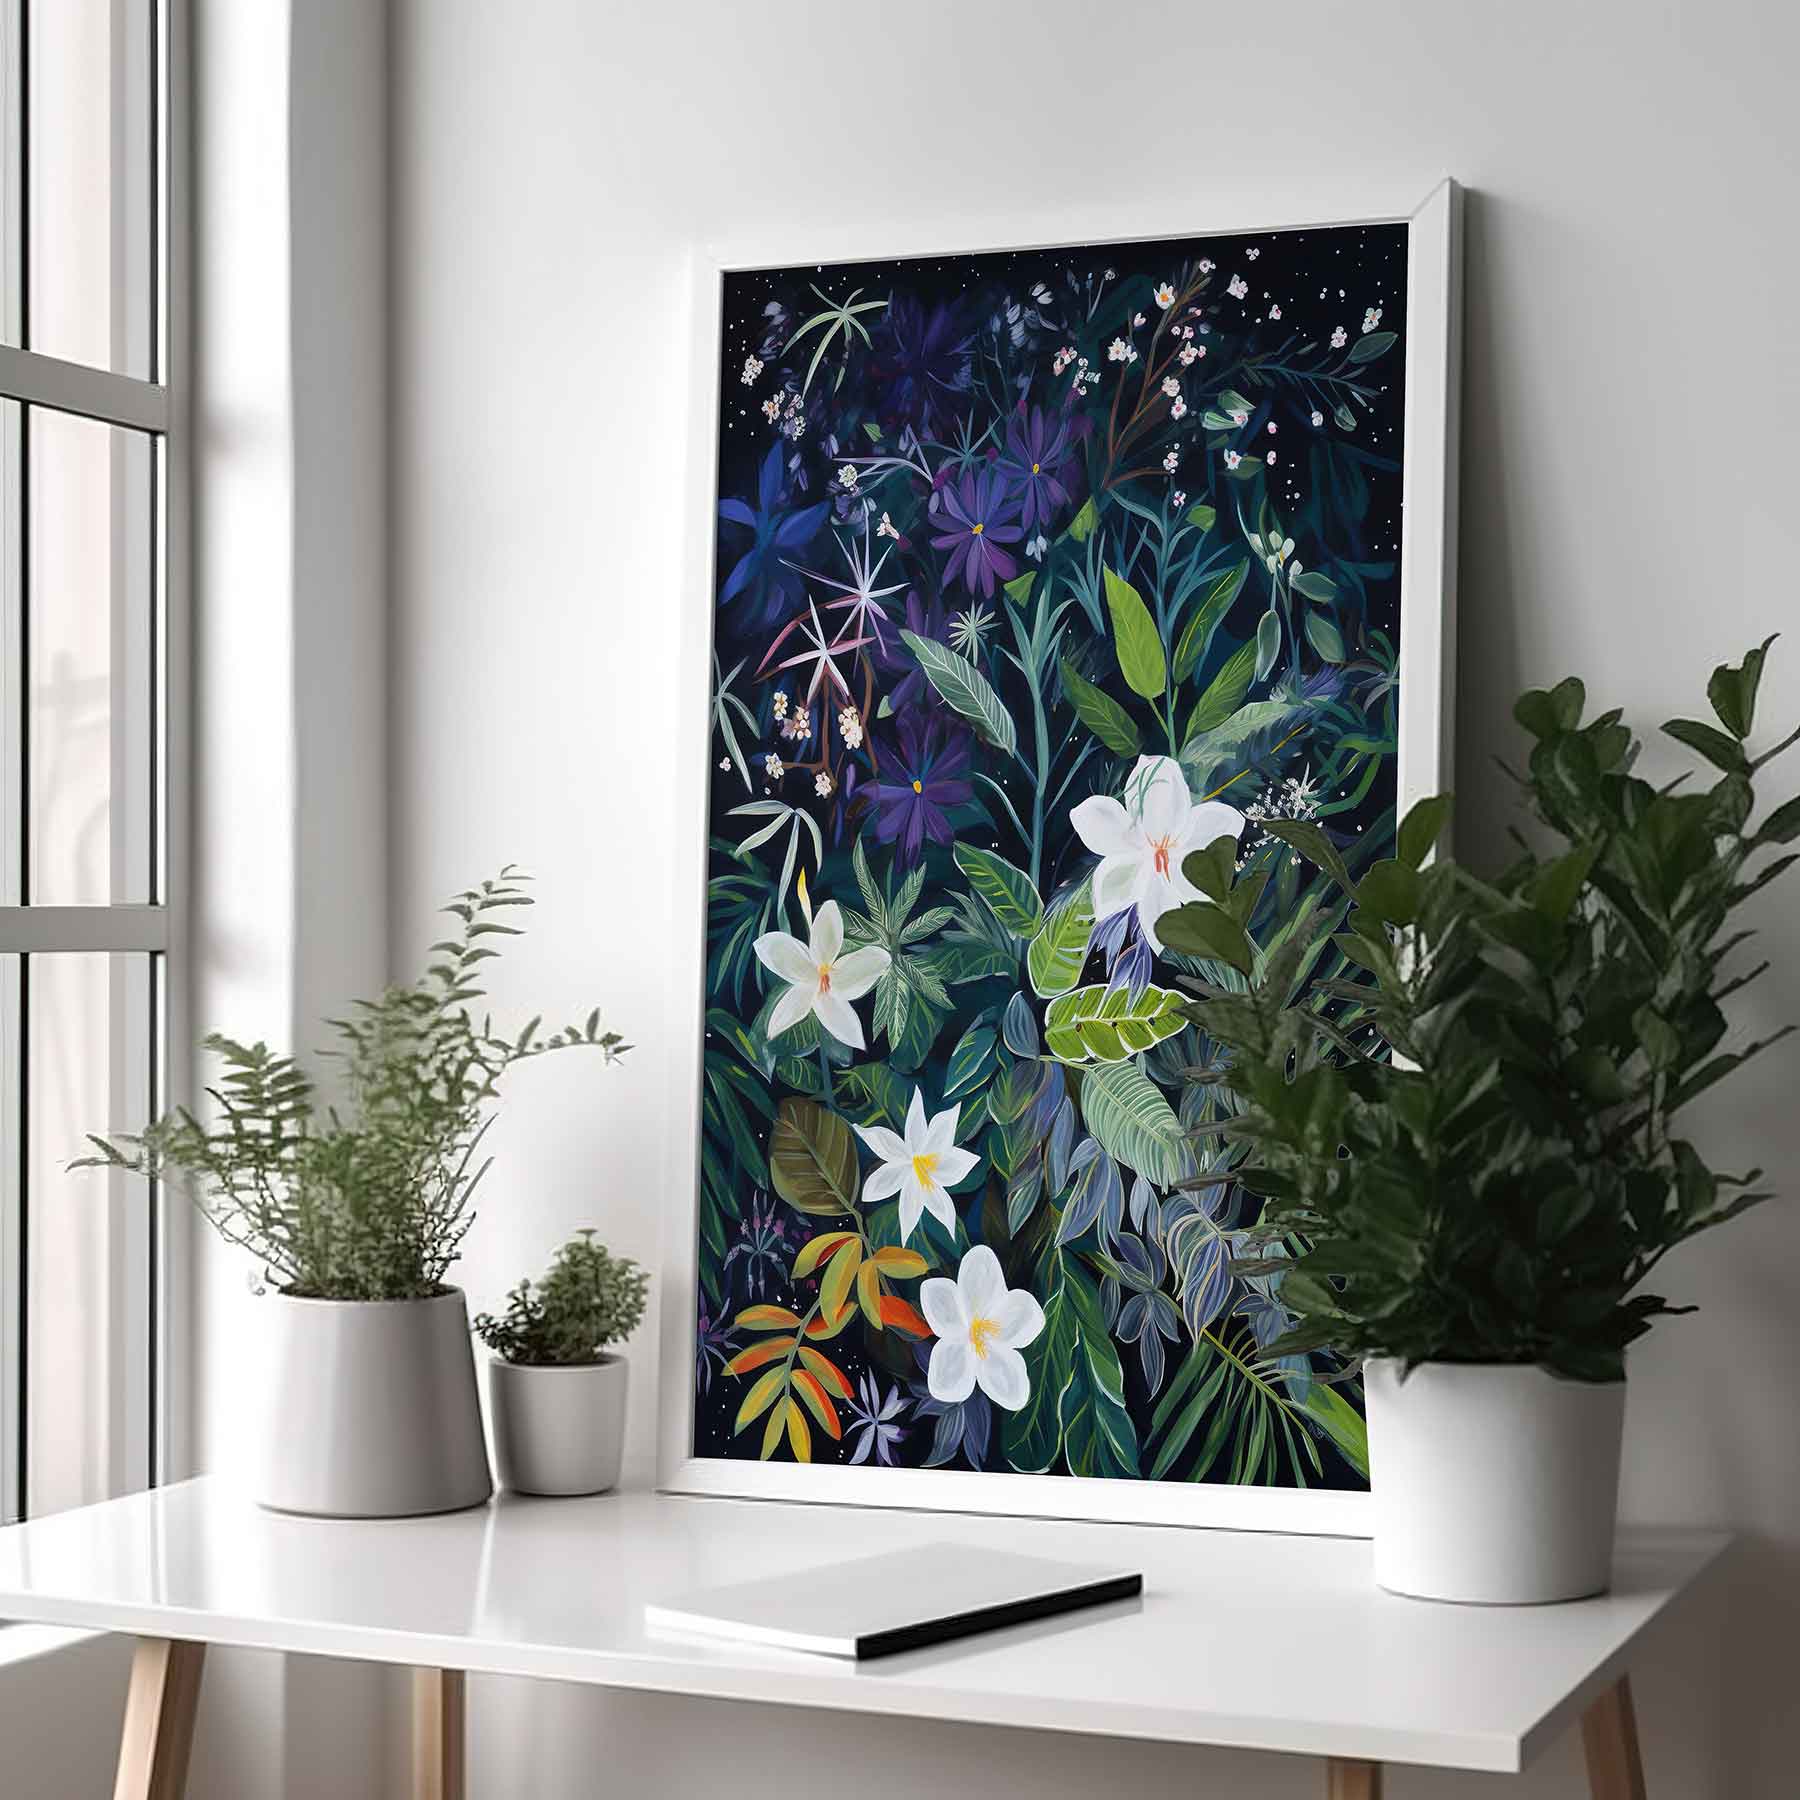 Framed Image of Wall Art Poster Print Night Tropical Flowers and Leaves Naive Style